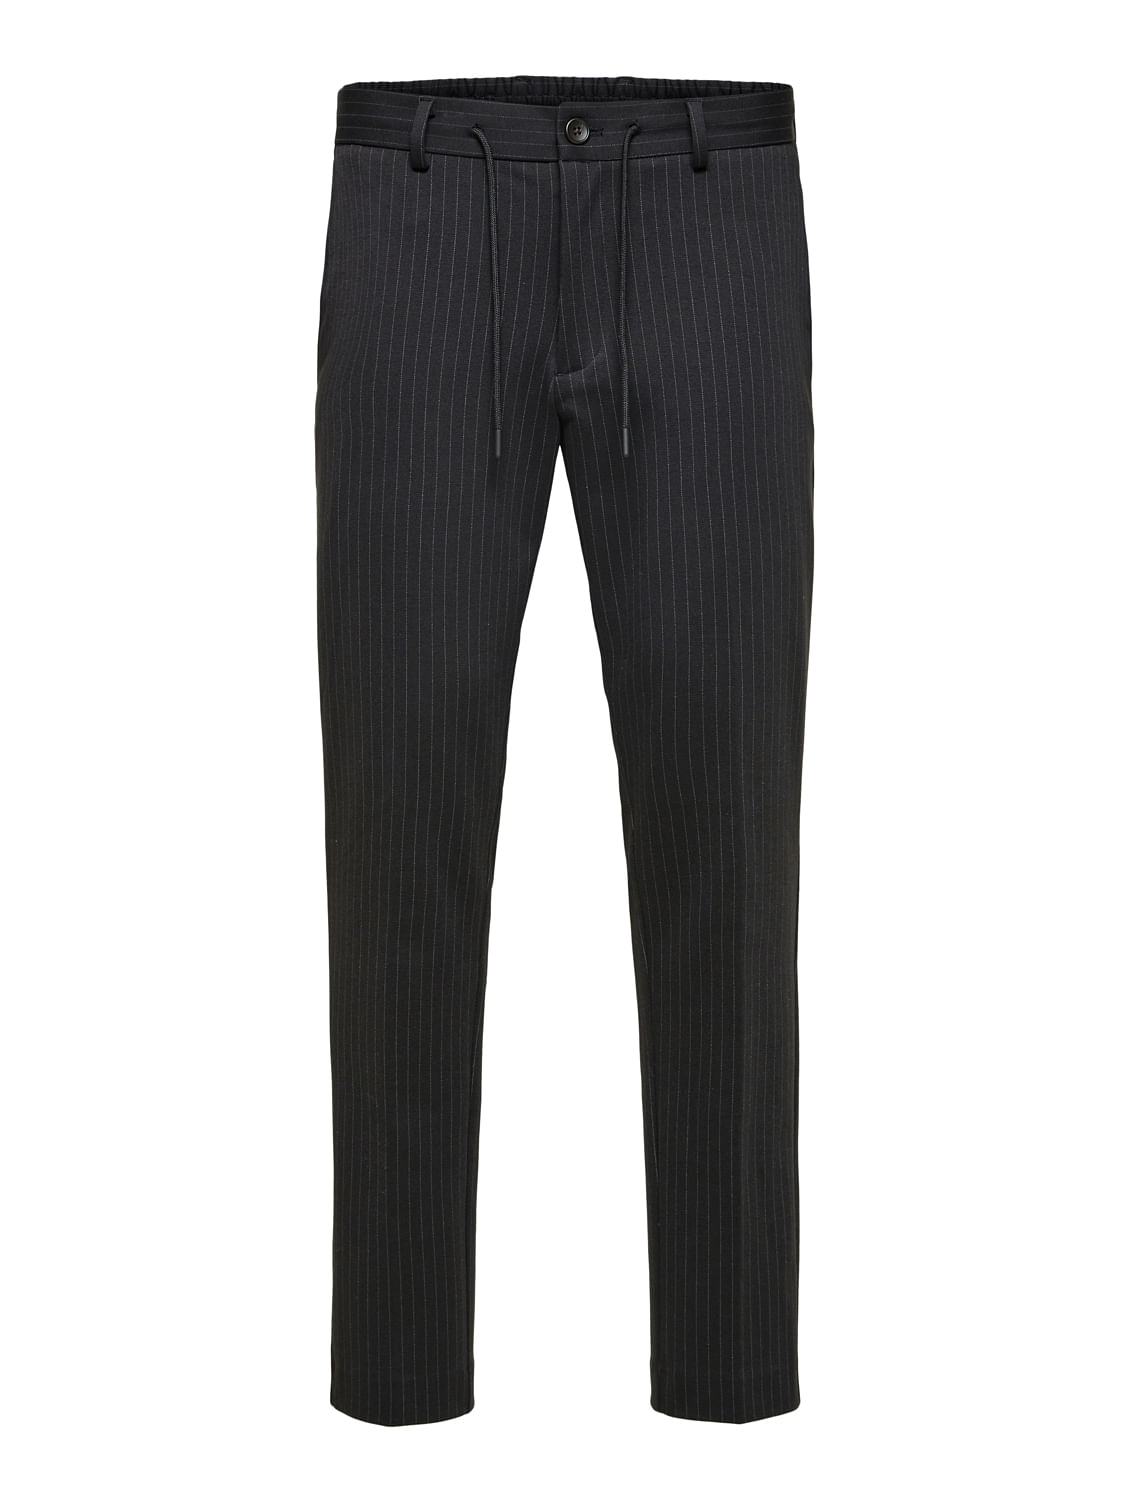 Black Plain Labroz Navy Blue Striped Chinos, Casual Wear, Men at Rs  490/piece in New Delhi